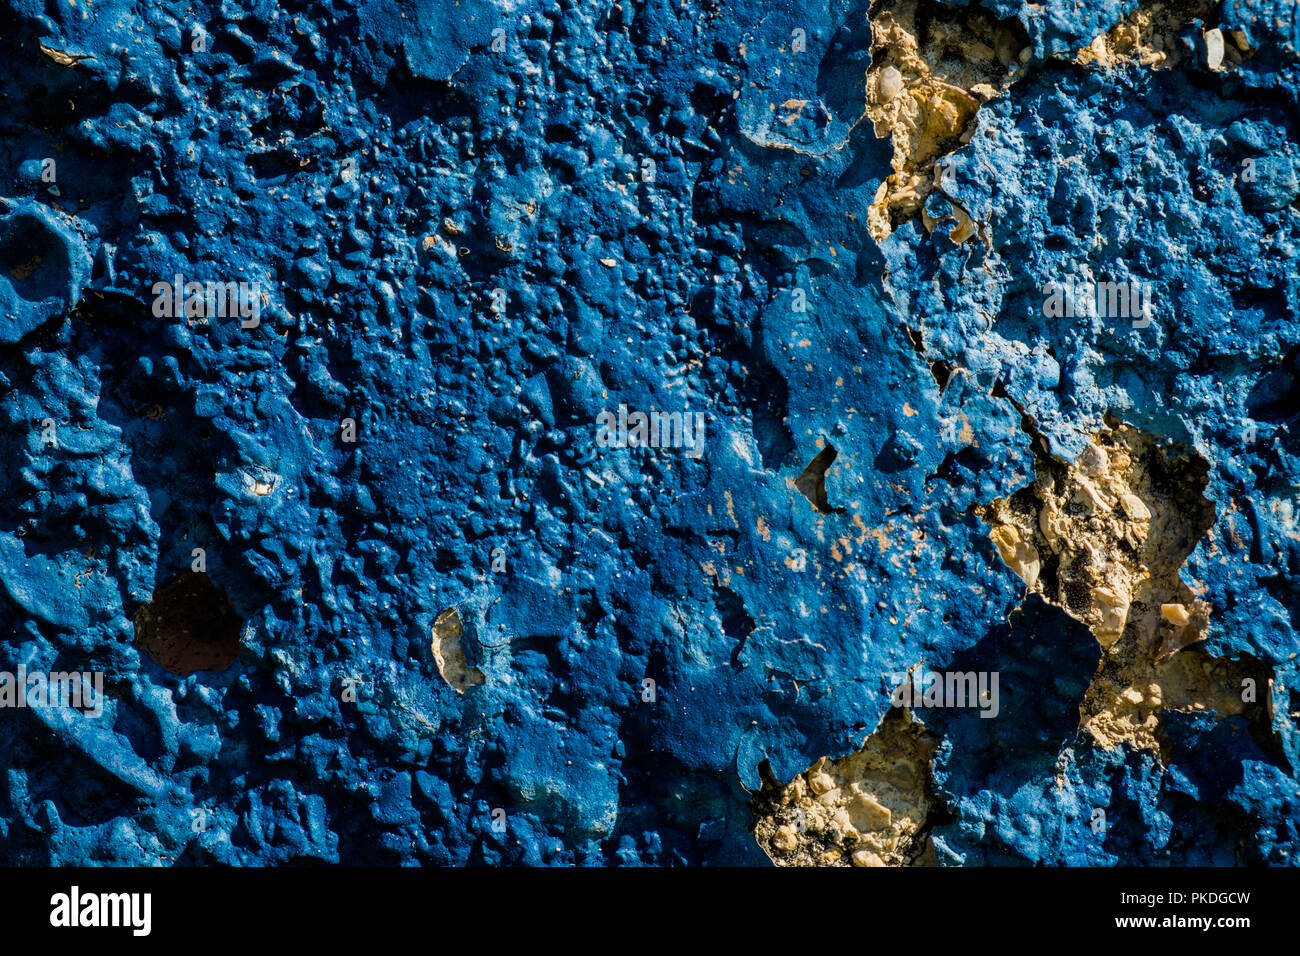 Yellow stone wall with dark blue plaster pealing off/grunge wall texture background Stock Photo